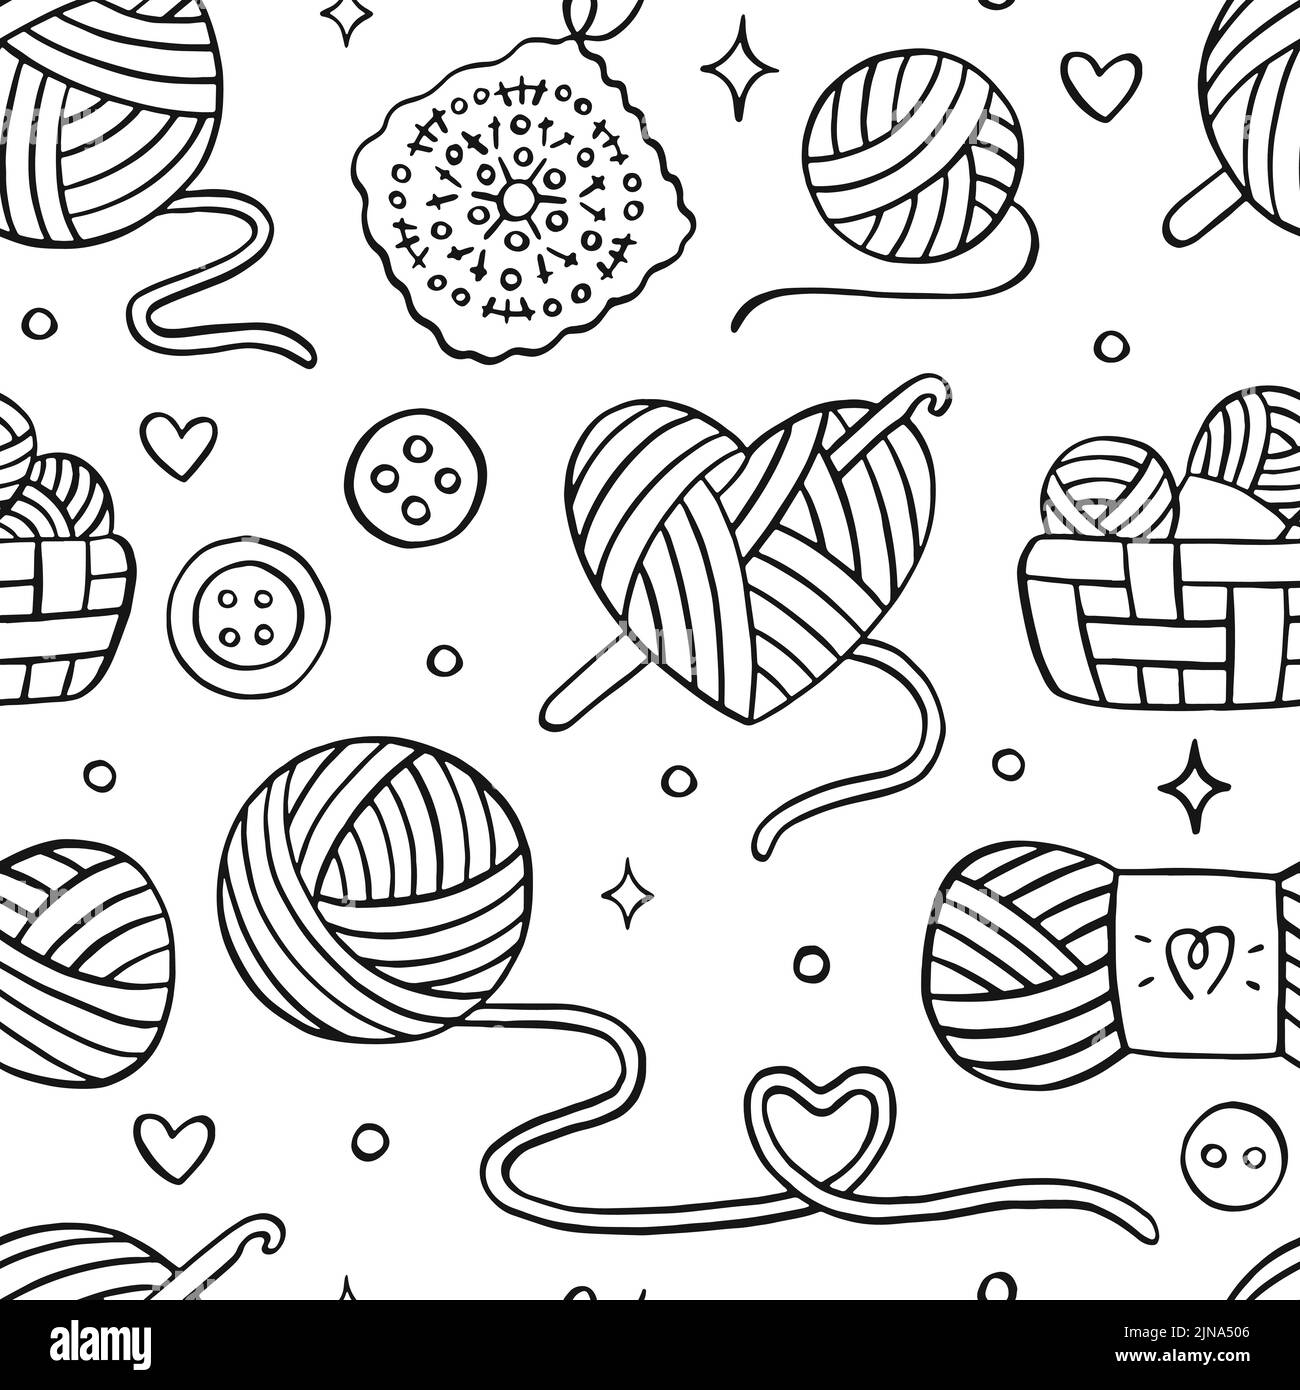 Knitting hook icon simple wool knit Royalty Free Vector